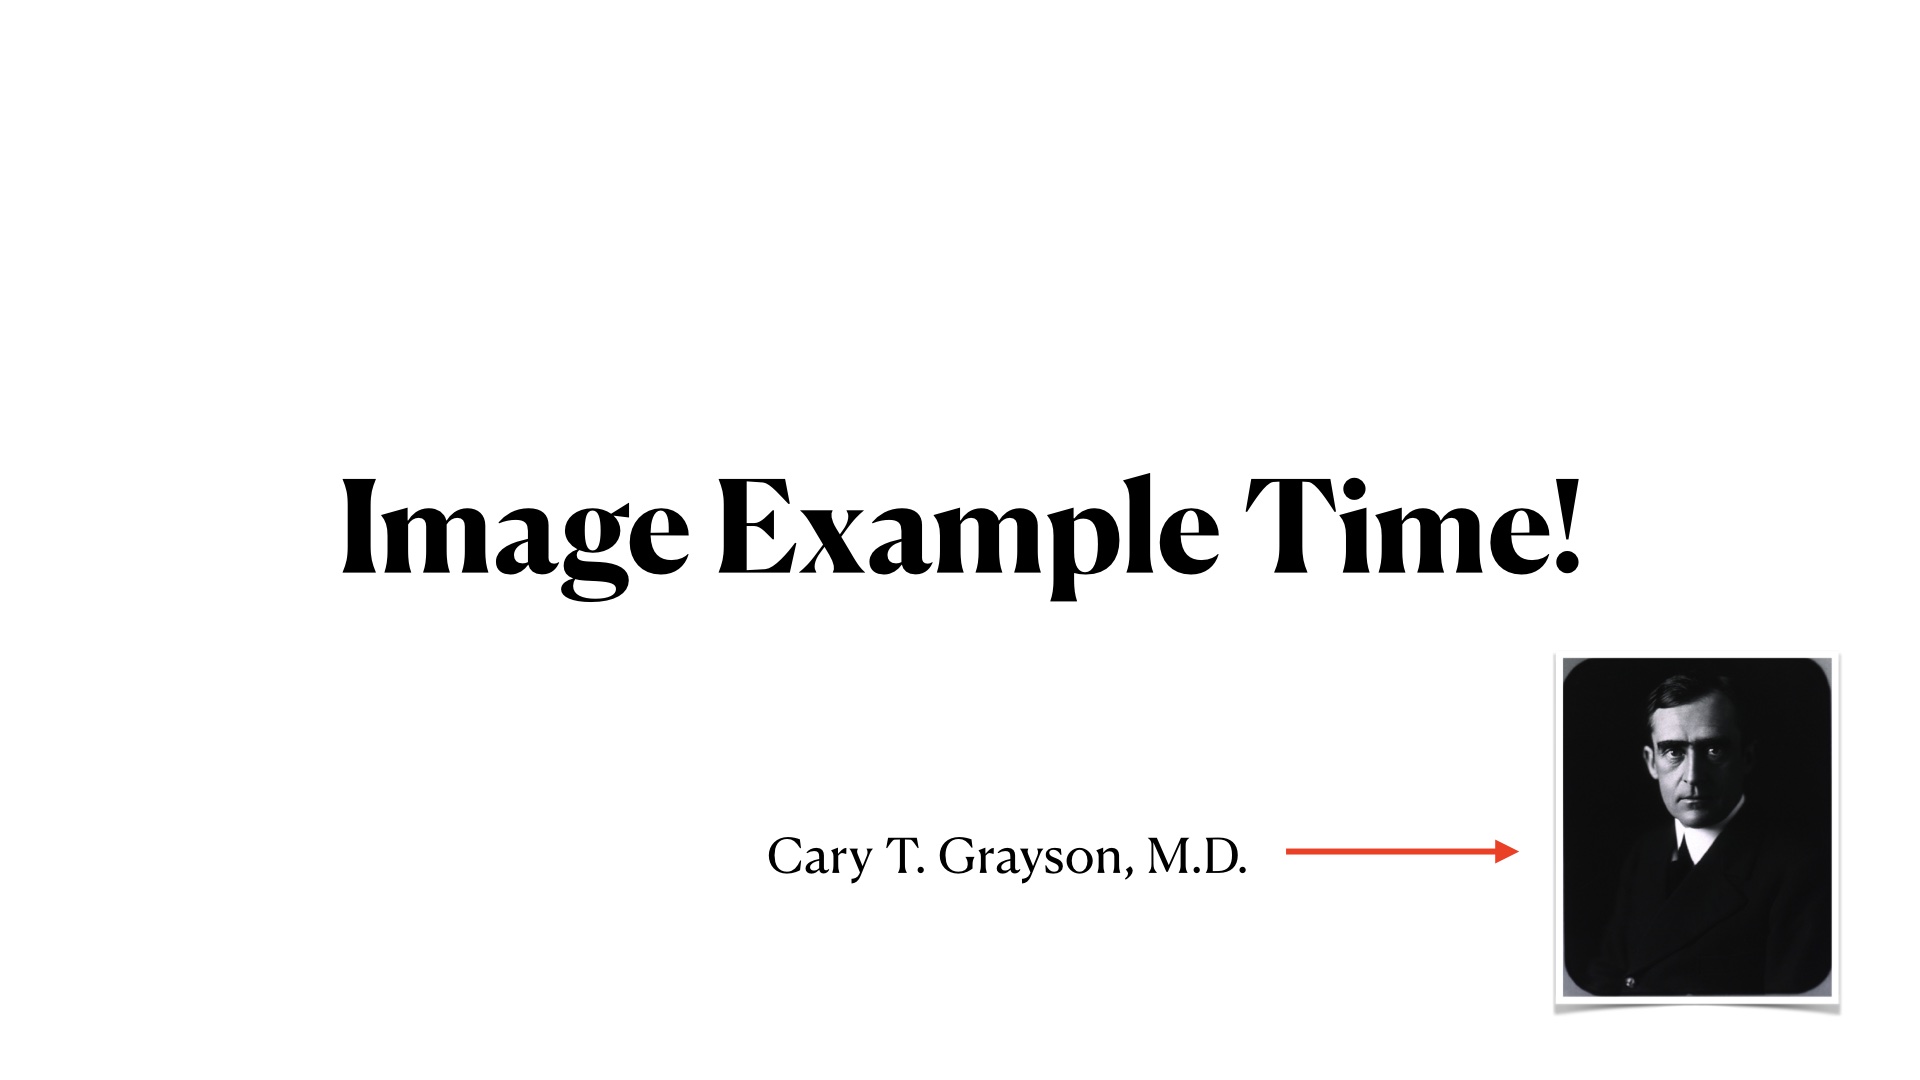 Image Example Time! With a small image of Cary T. Grayson, a doctor's photo I got from the National Library of Medicine.